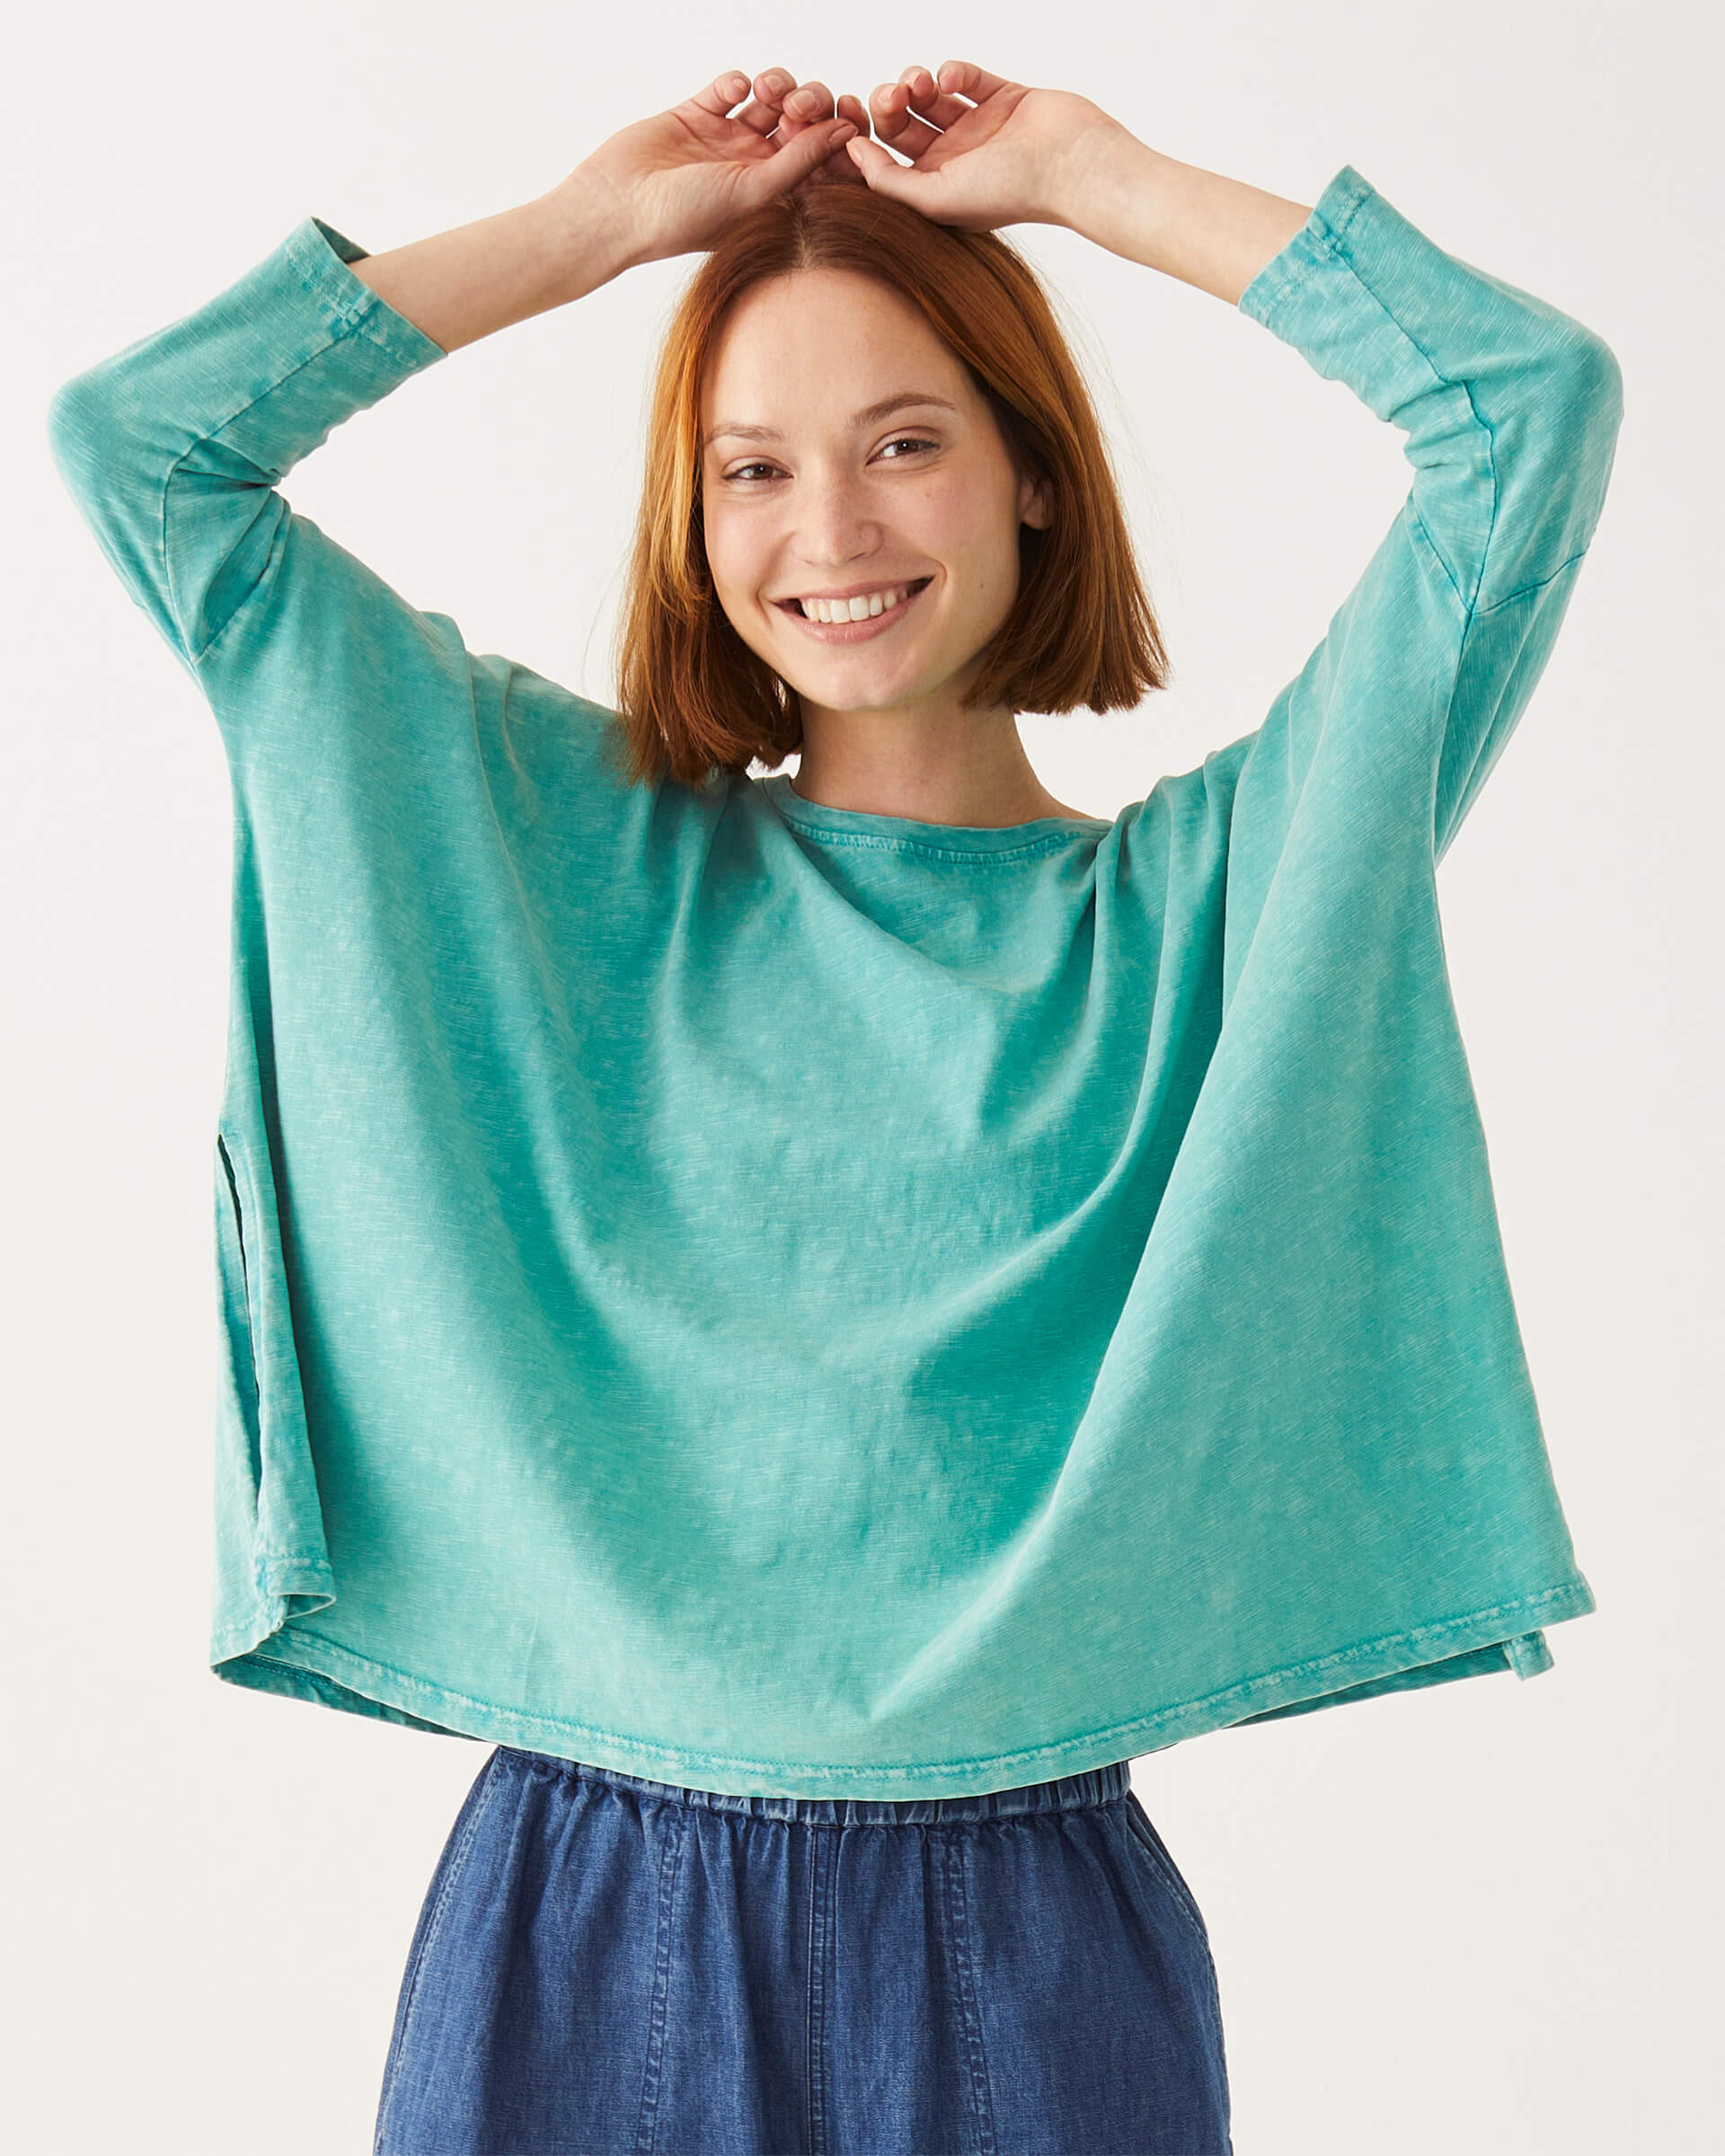 female wearing greenish blue long sleeve tee shirt with split sides on a white background